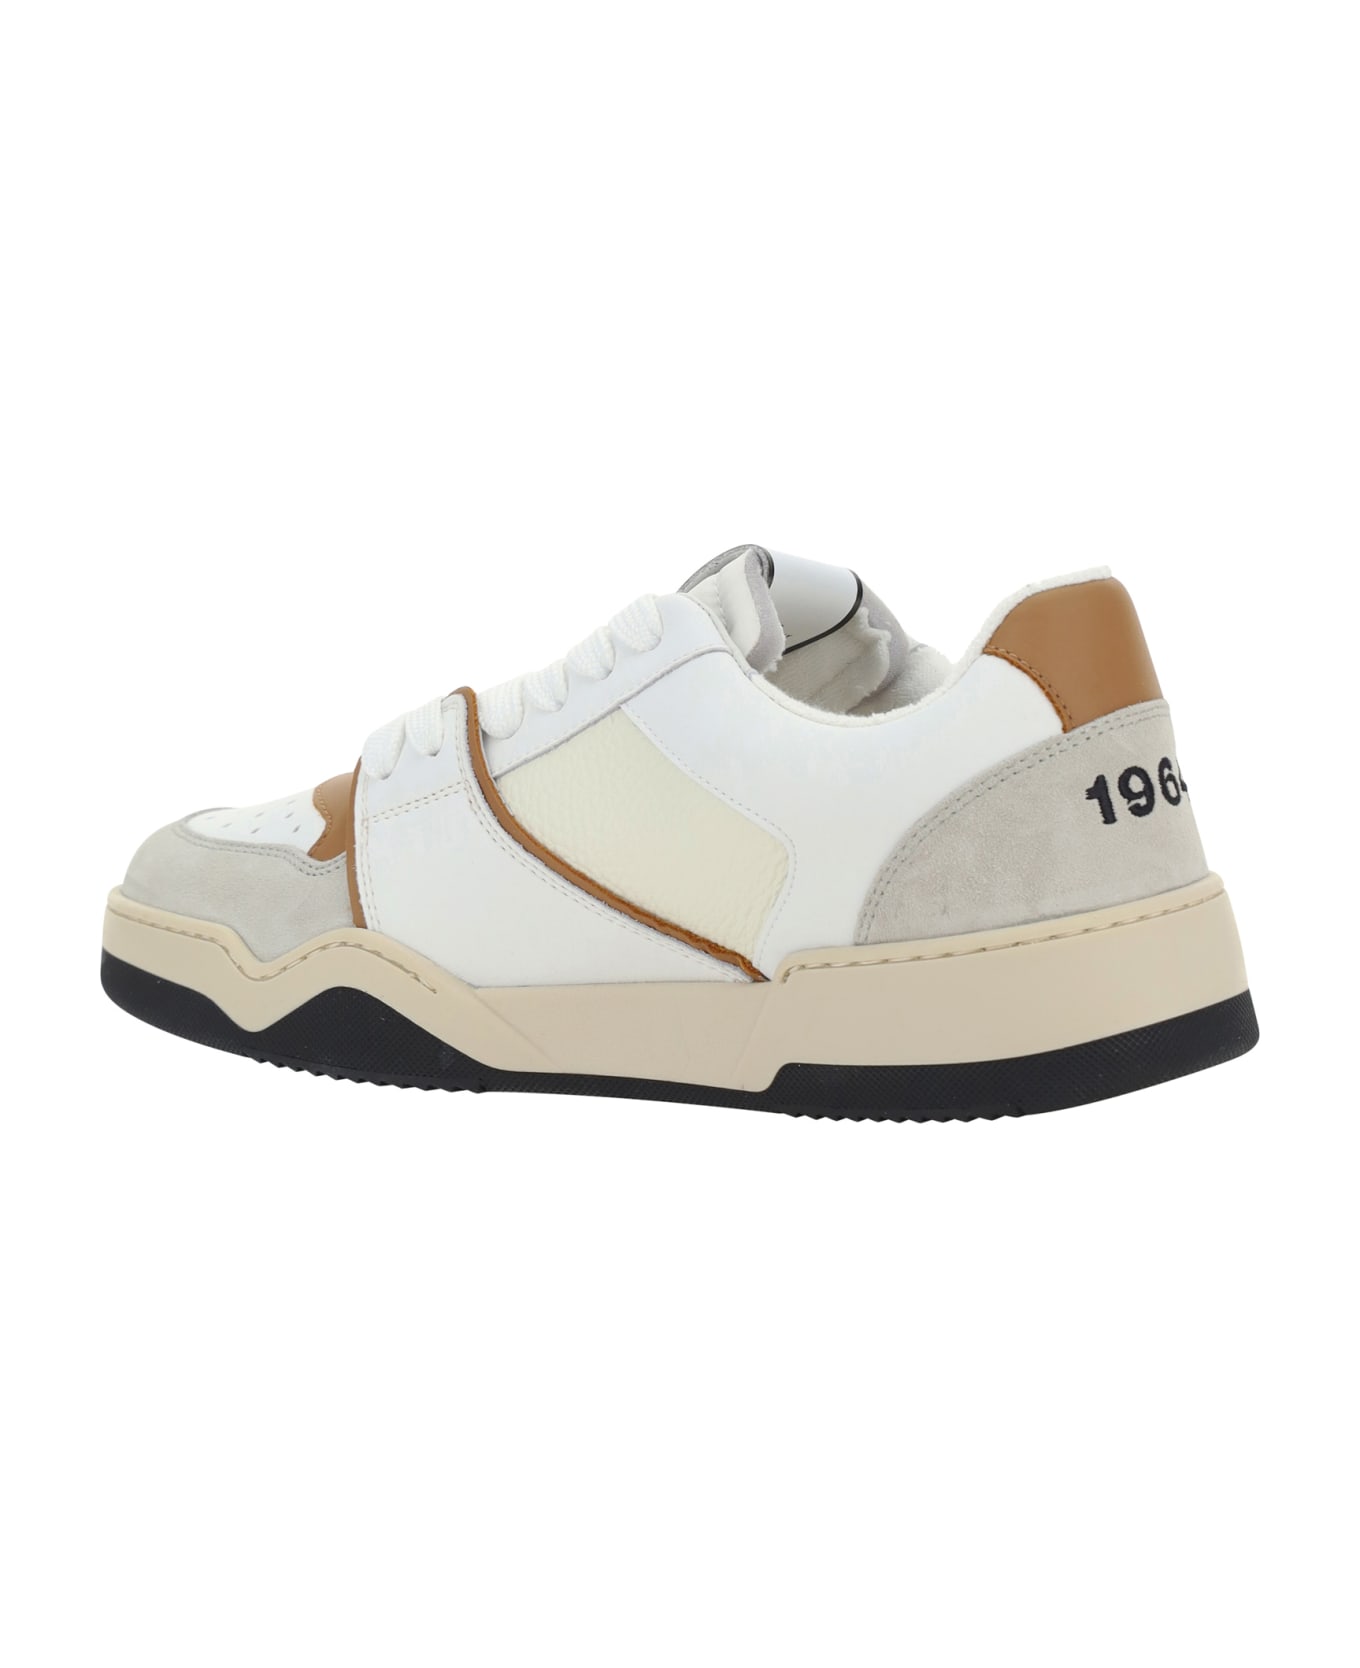 Dsquared2 Spiker Sneakers - M2579